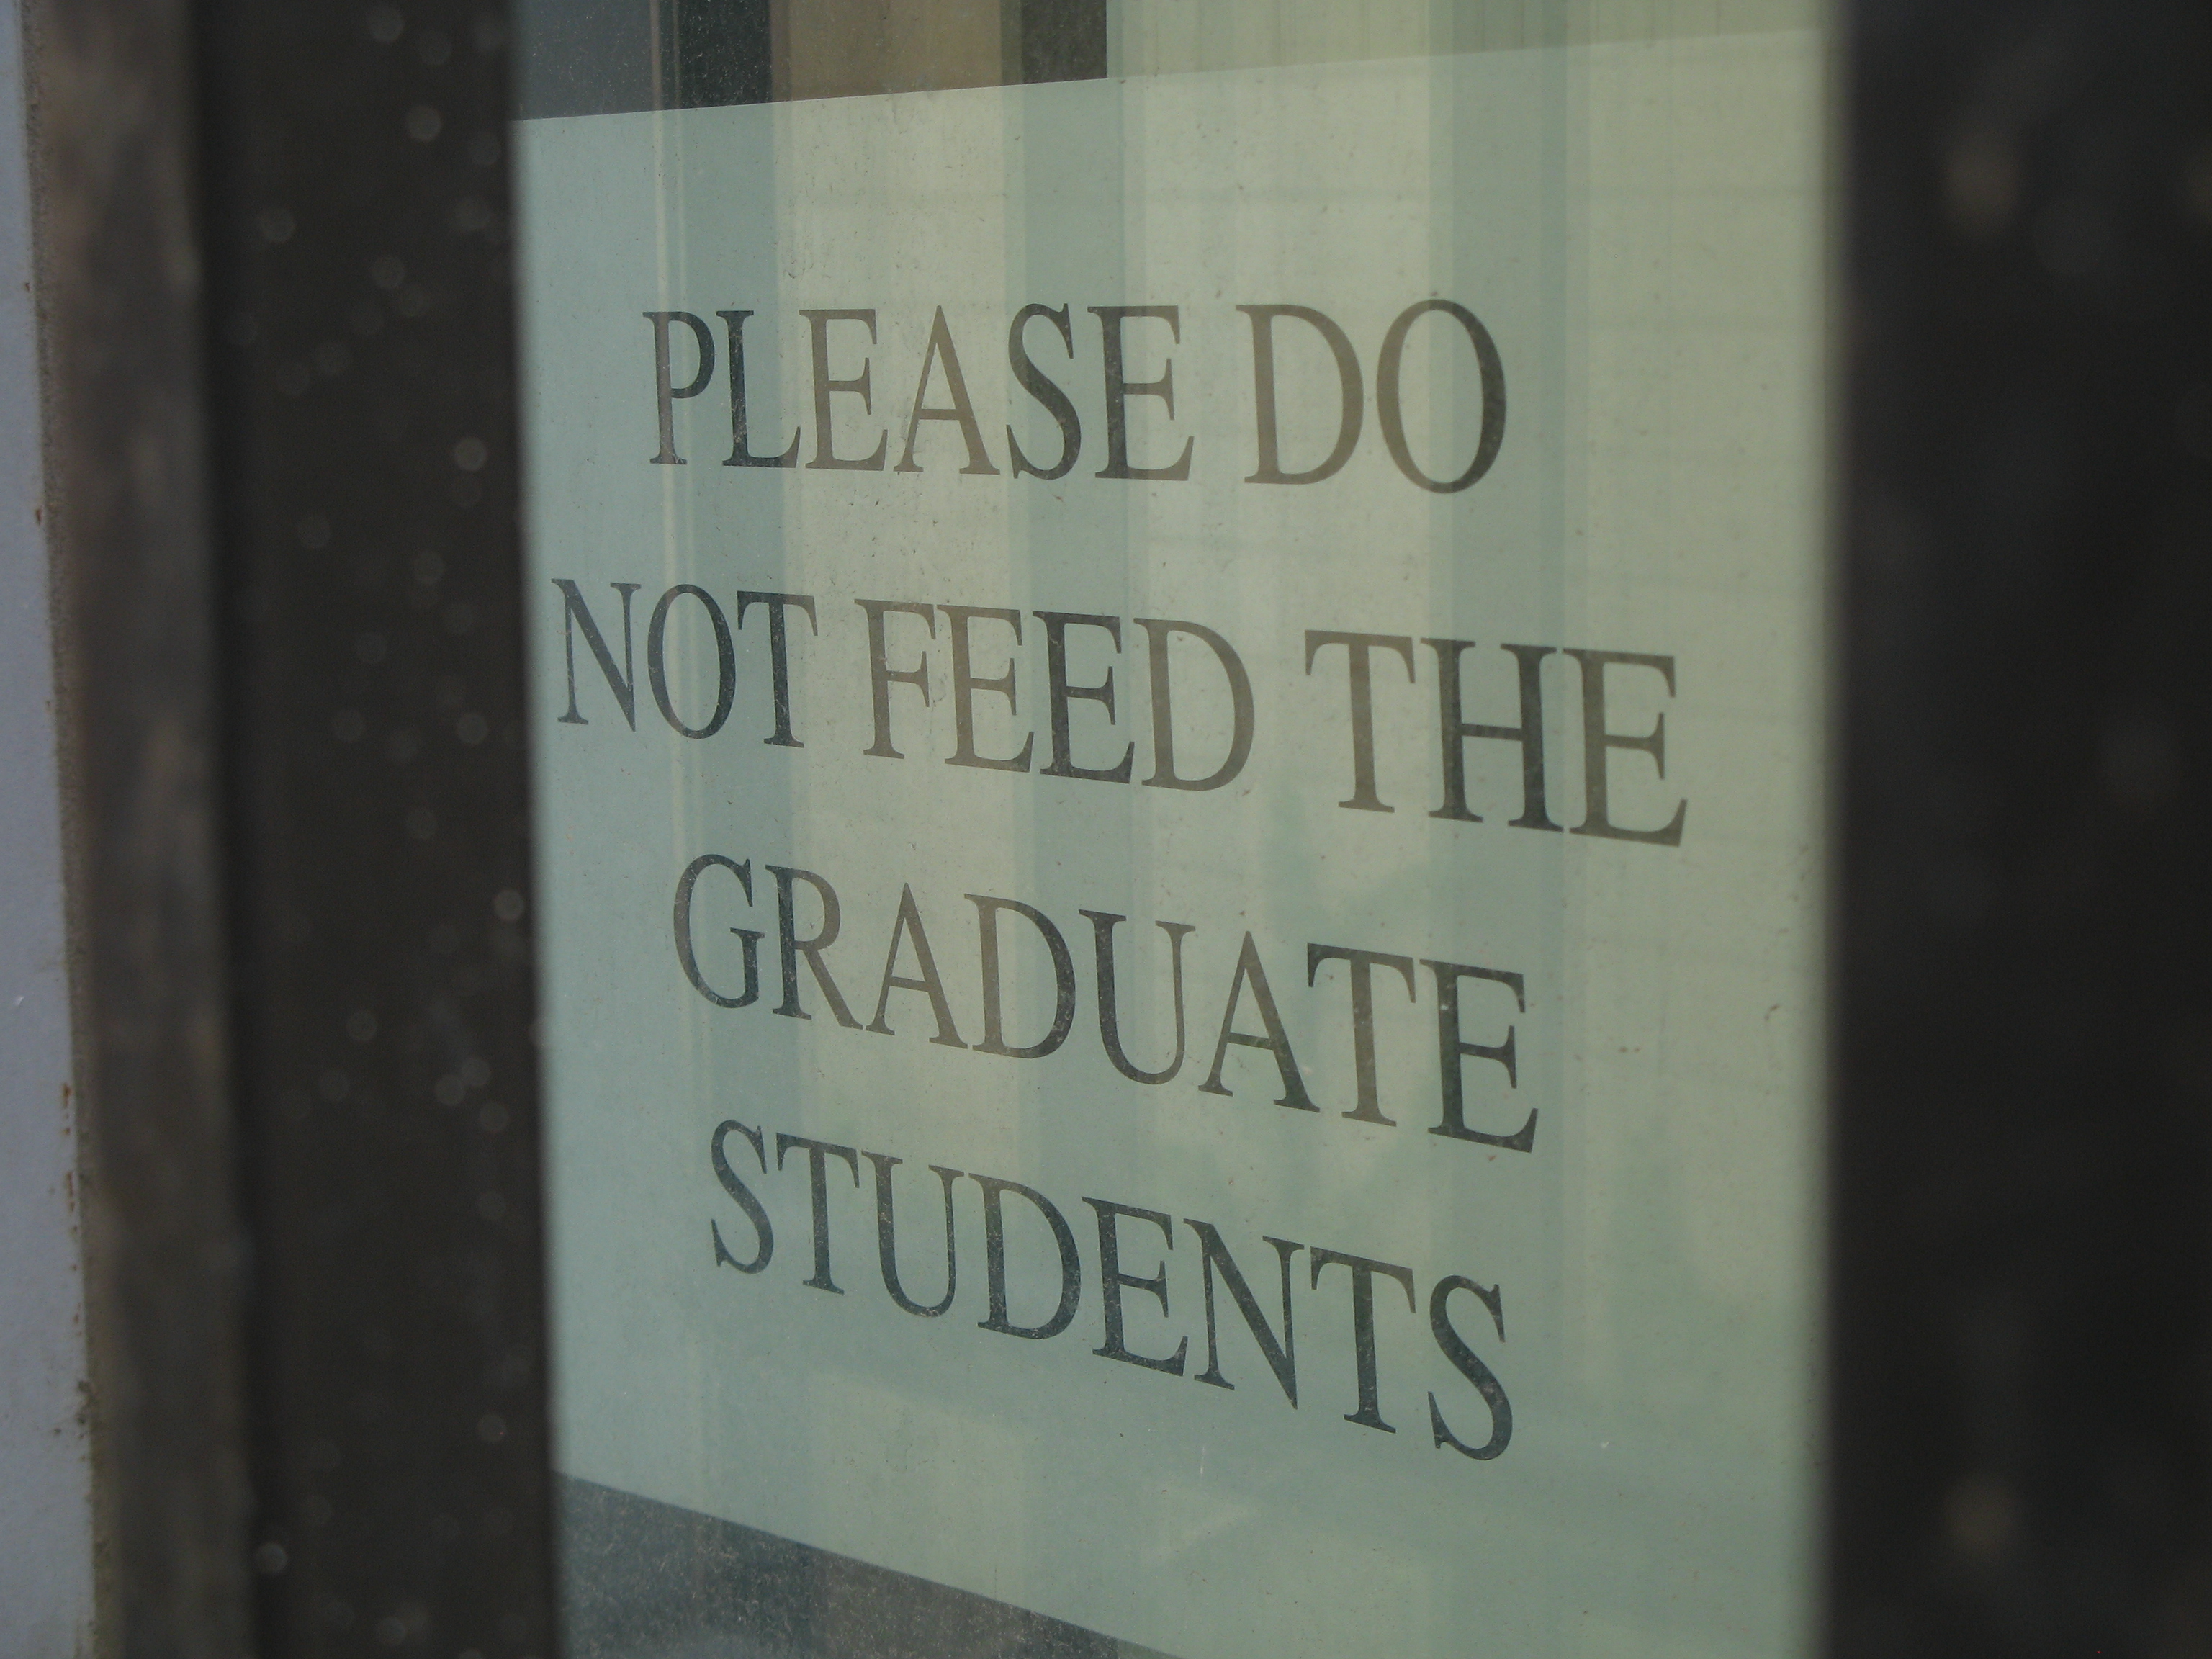 TERTL Window Sign: "PLEASE DO NOT FEED THE GRADUATE STUDENTS"